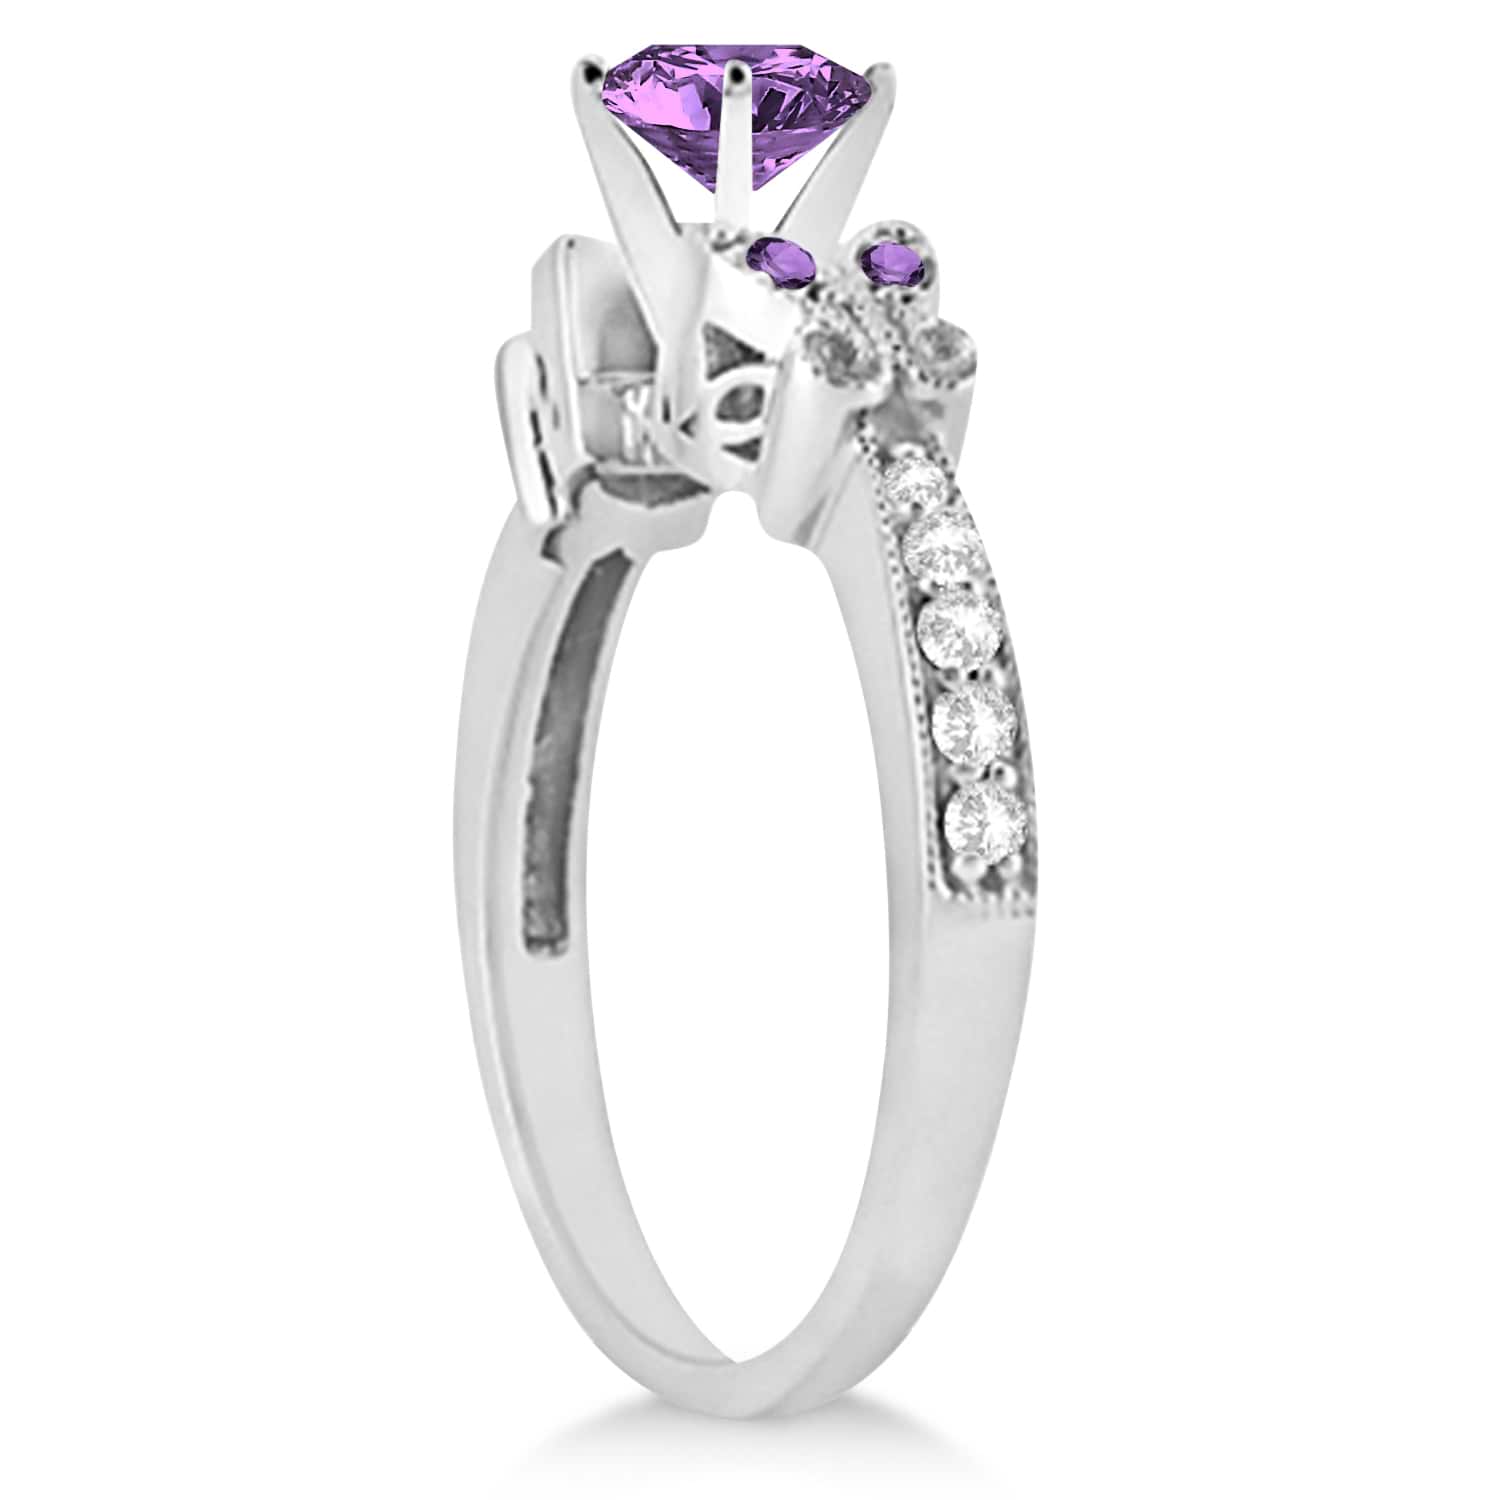 Butterfly Amethyst & Diamond Engagement Ring 18K White Gold (1.53ct)